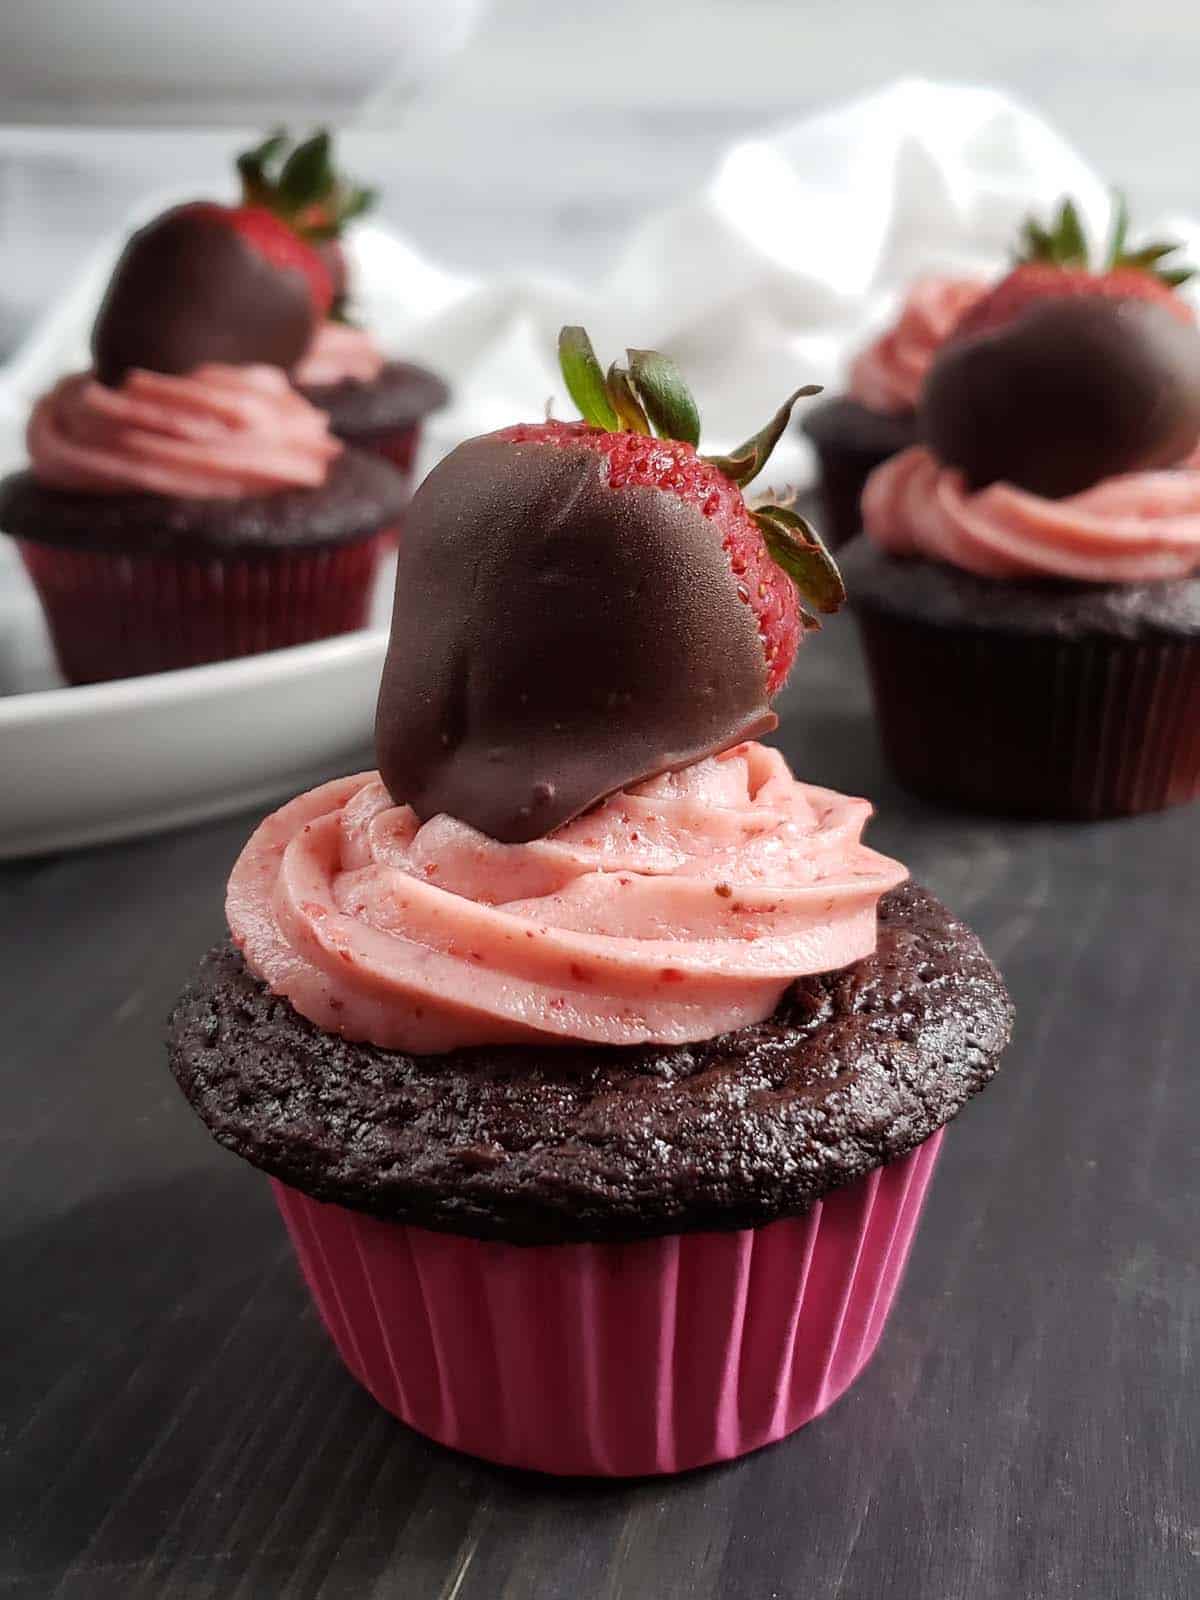 Chocolate strawberry cupcake topped with a chocolate covered strawberry.